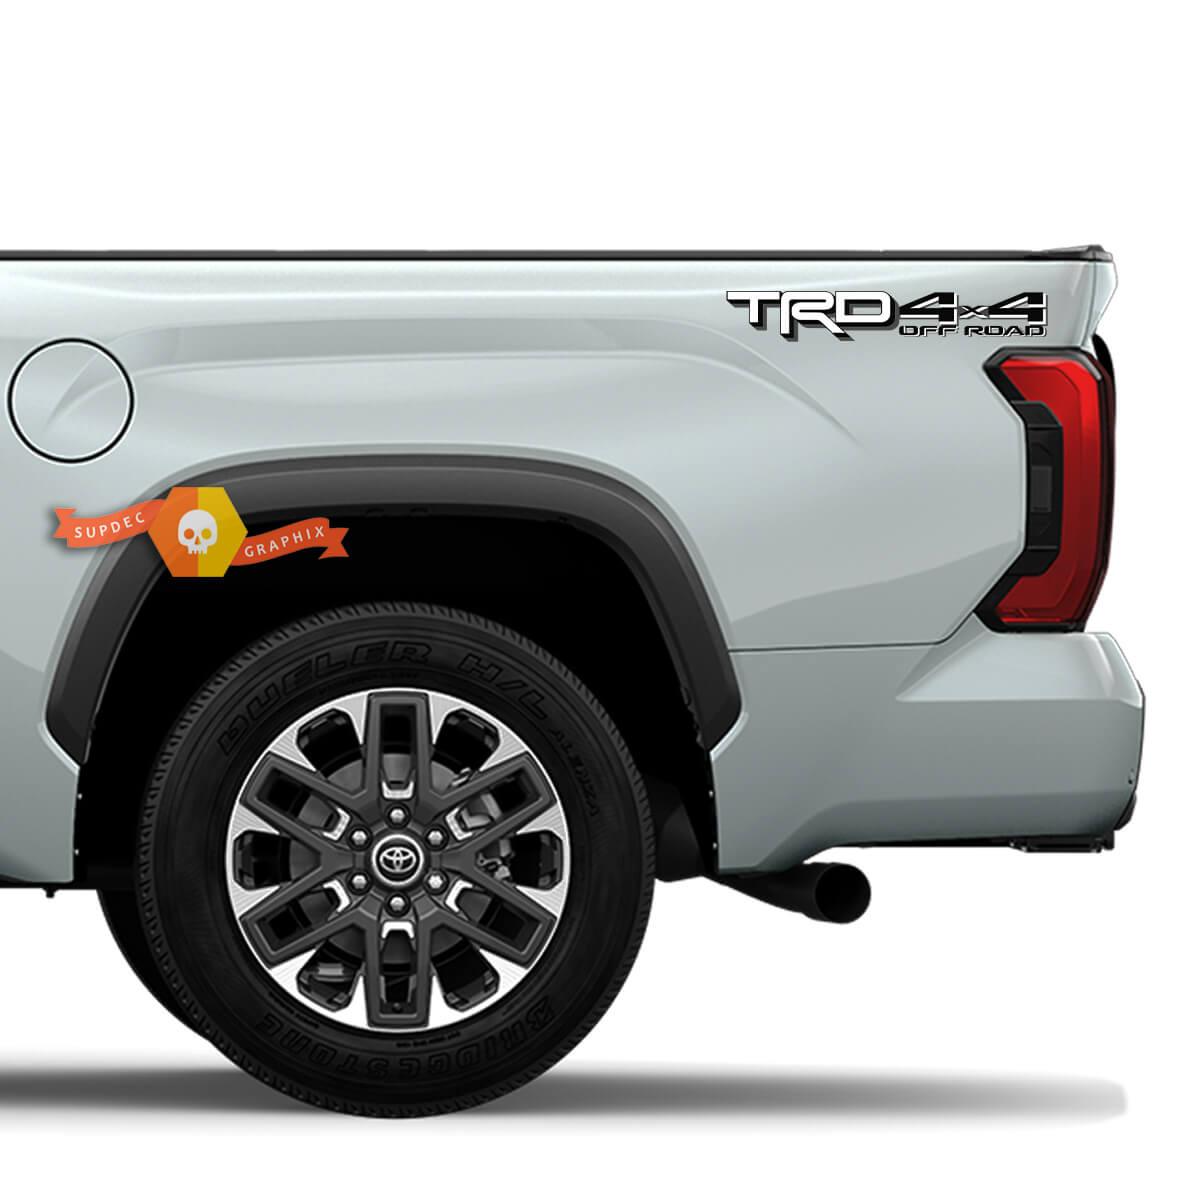 Pair Toyota TRD Truck 4x4 Off Road Toyota Racing Tacoma Decal Vinyl Sticker